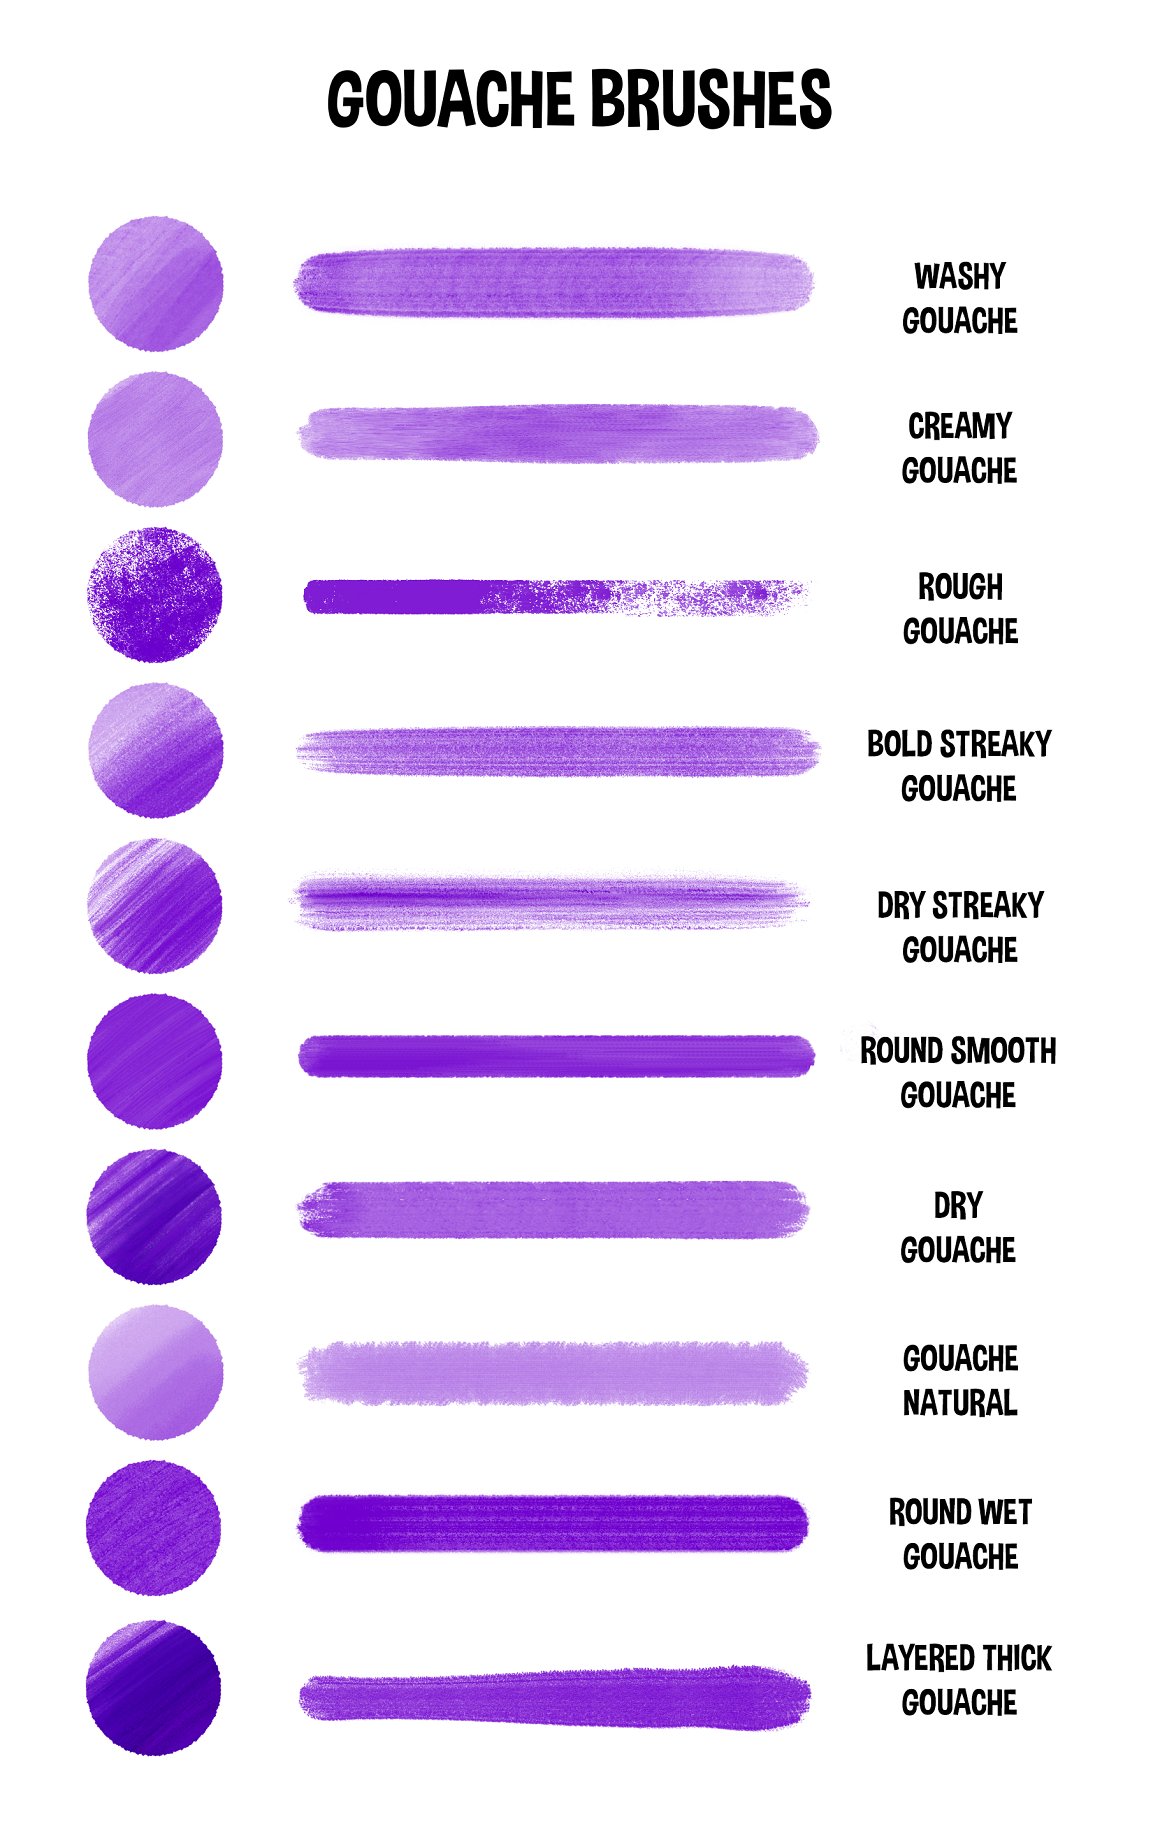 A set of 10 different purple gouache brushes on a white background.